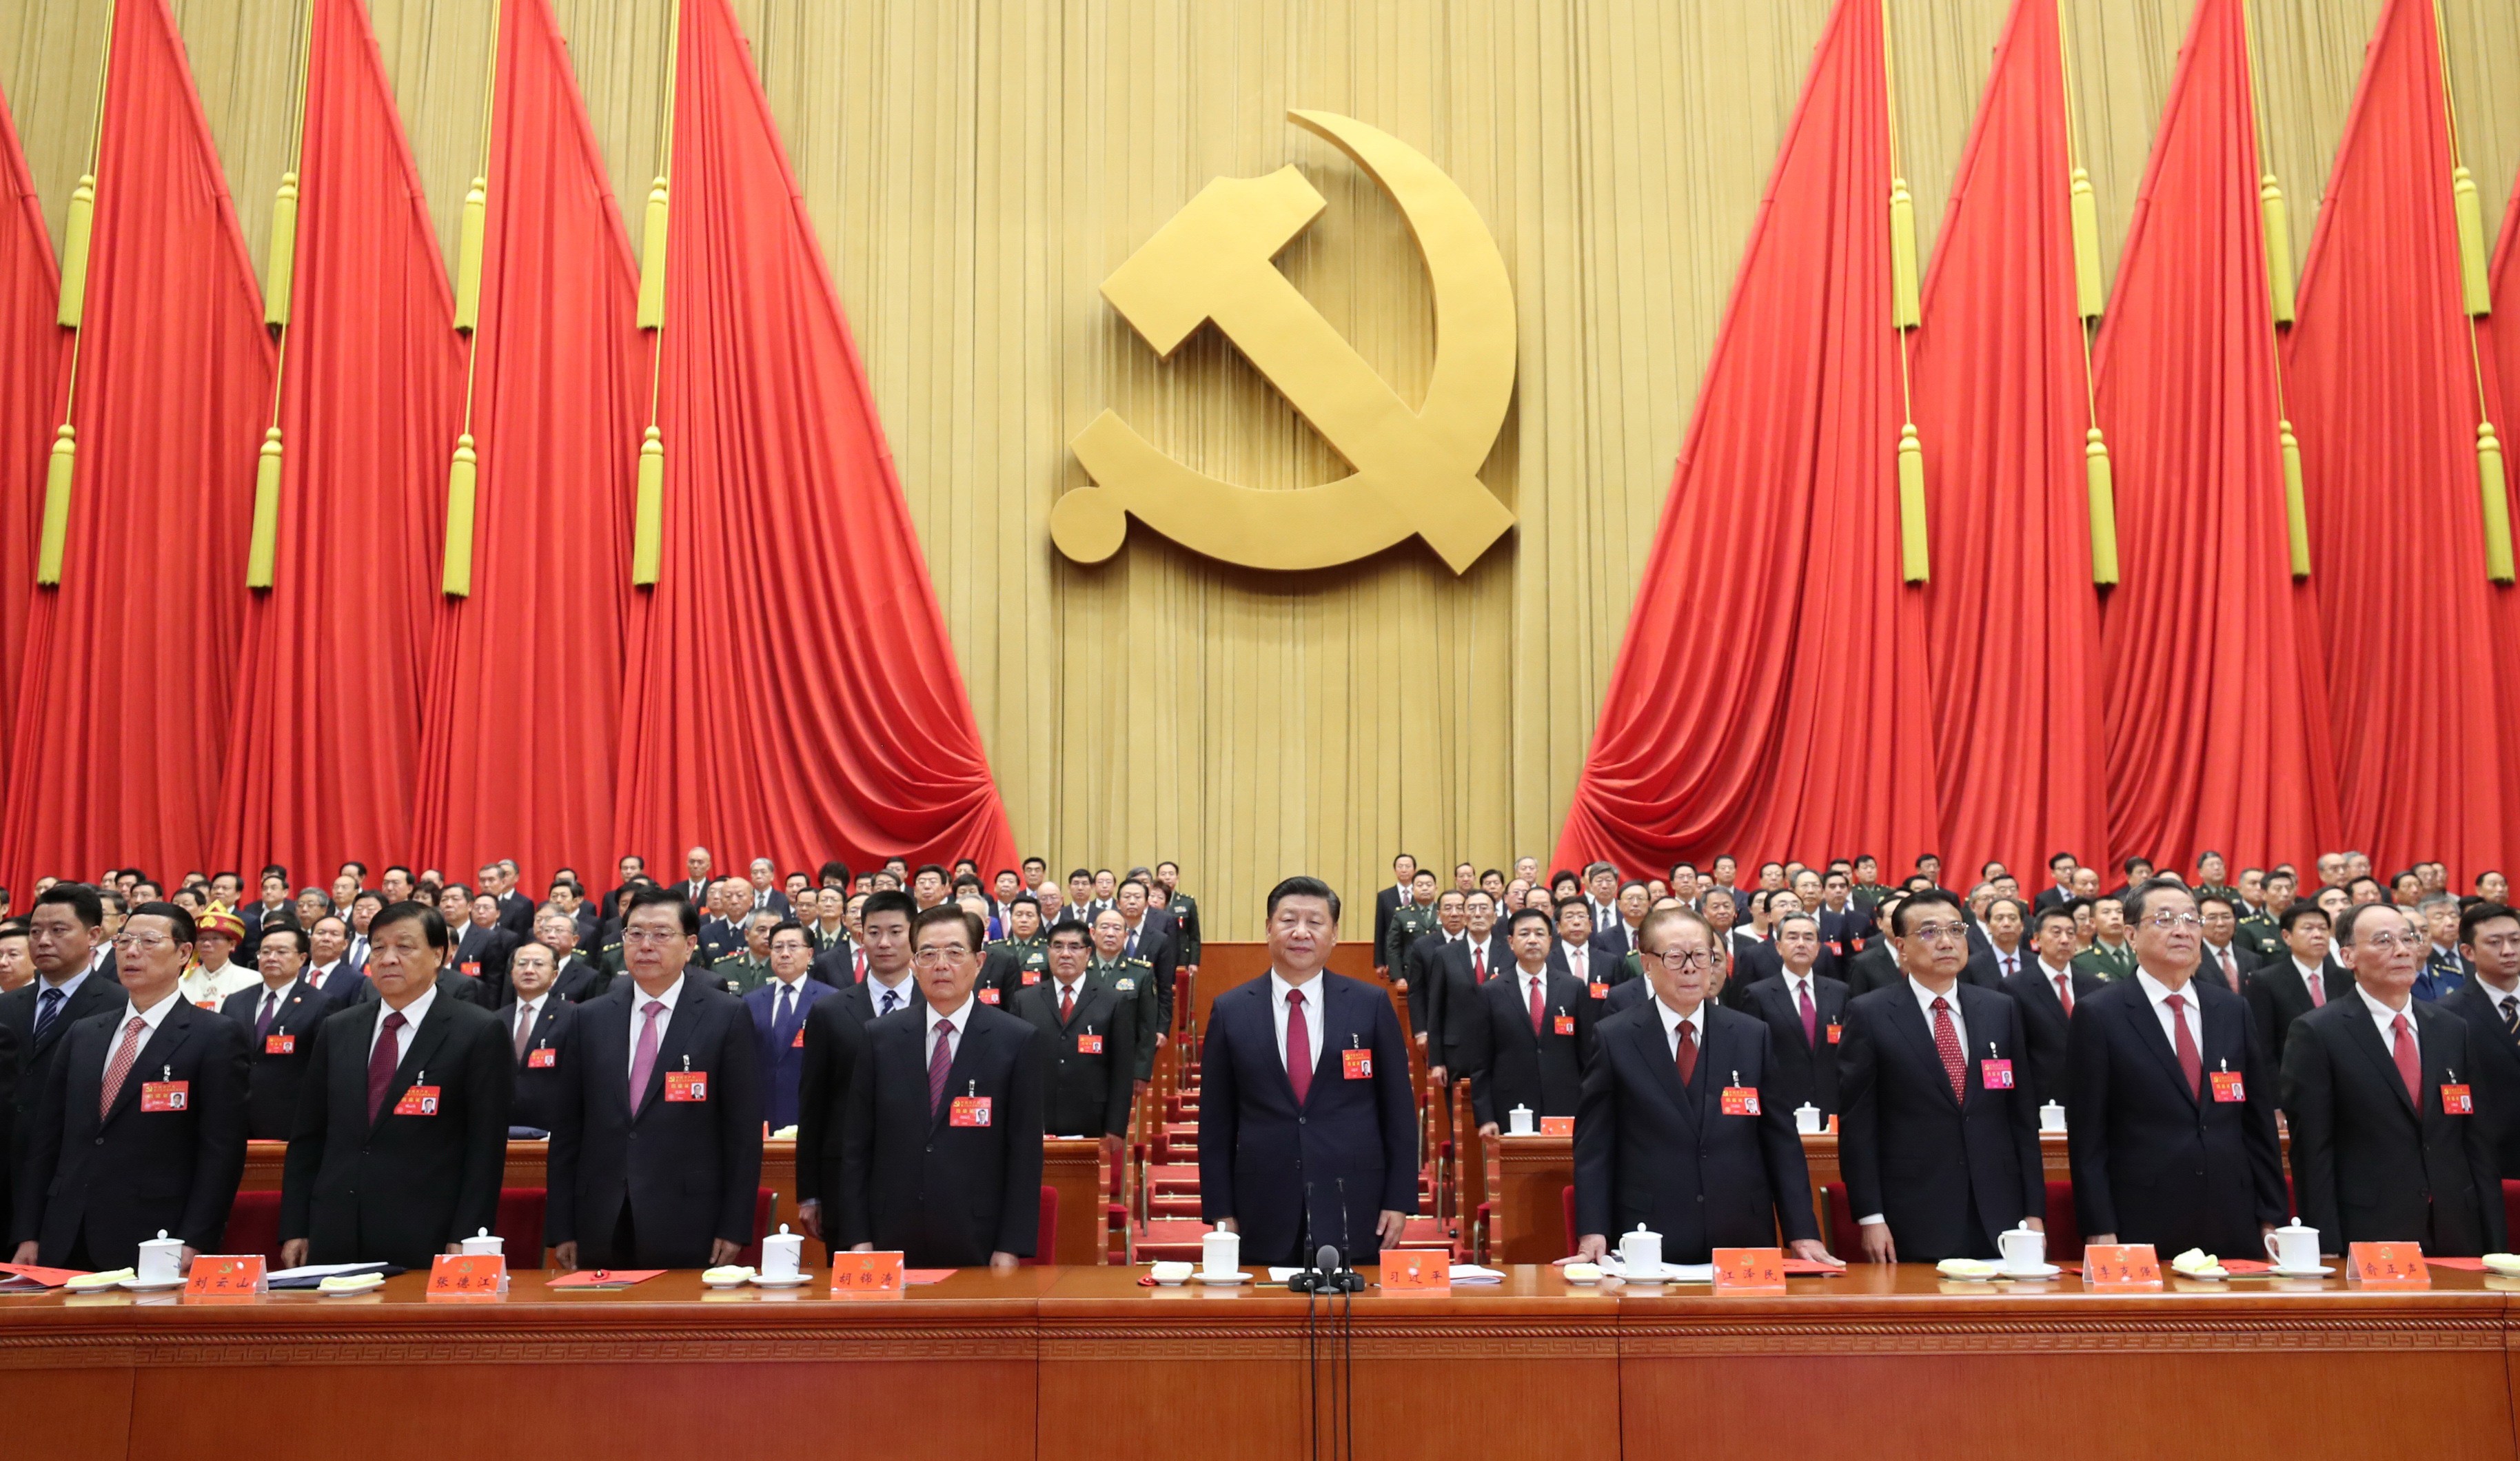 Under the Chinese political system, true power lies with the general secretary, but Xi Jinping could be aiming to shift the dynamic